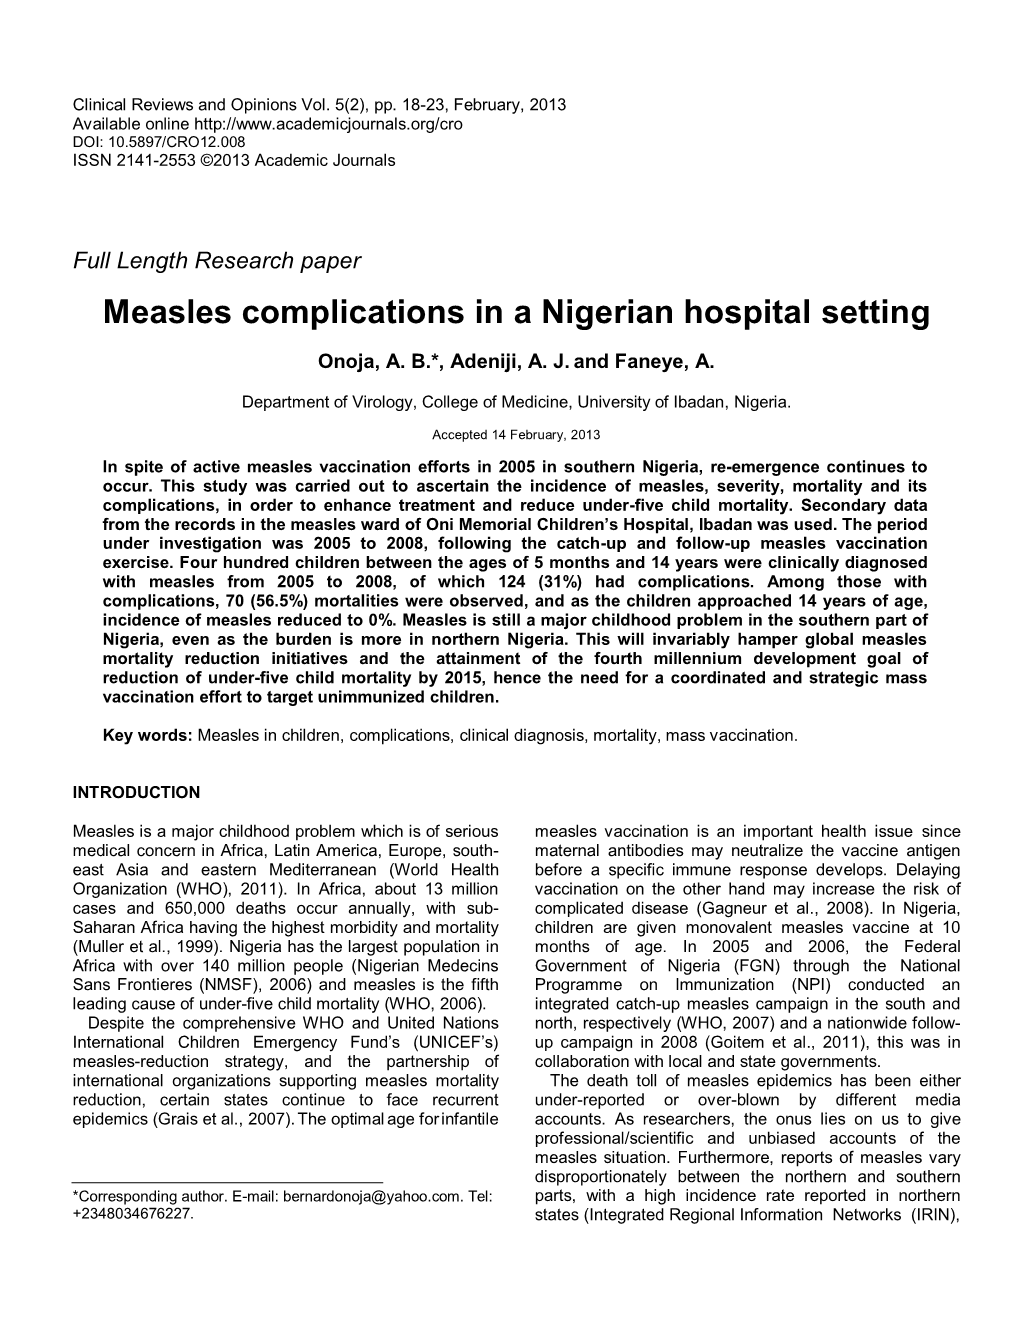 Measles Complications in a Nigerian Hospital Setting